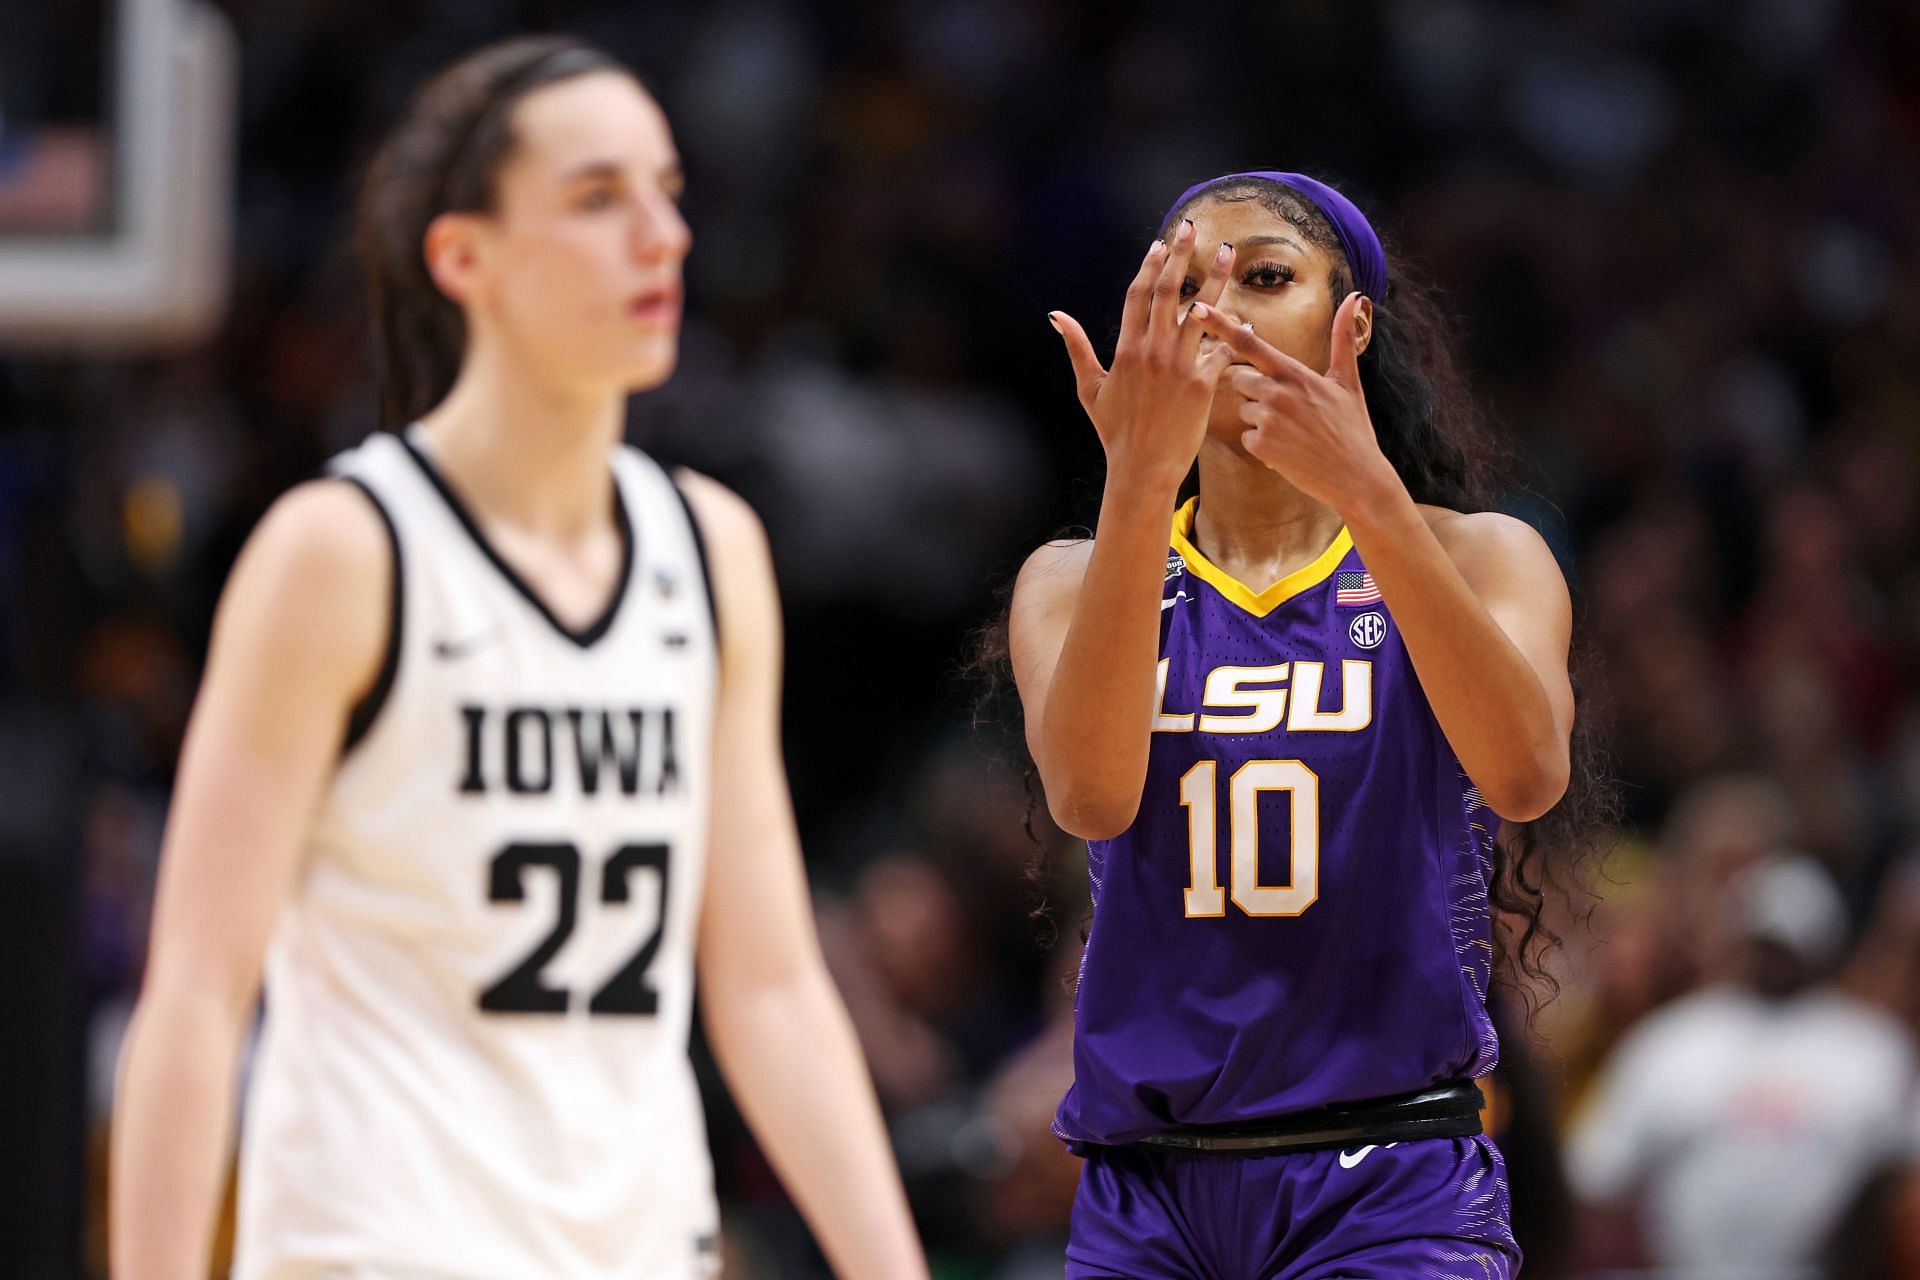 LSU got the best of Iowa a season ago, but the next battle looms for a trip to the Final Four.